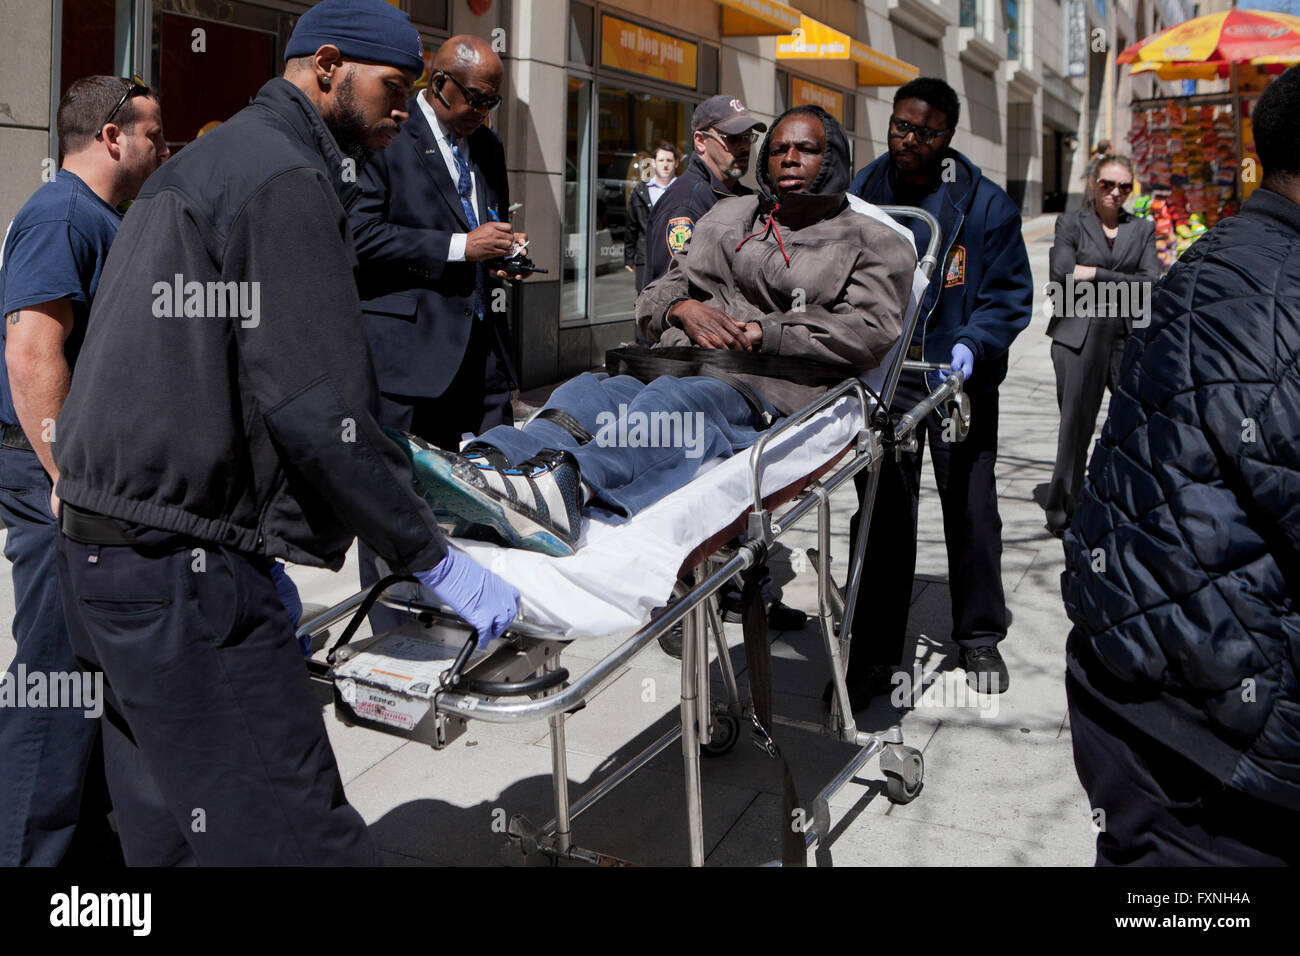 DC Fire & EMT team respond to a person in distress on sidewalk - Washington, DC USA Stock Photo